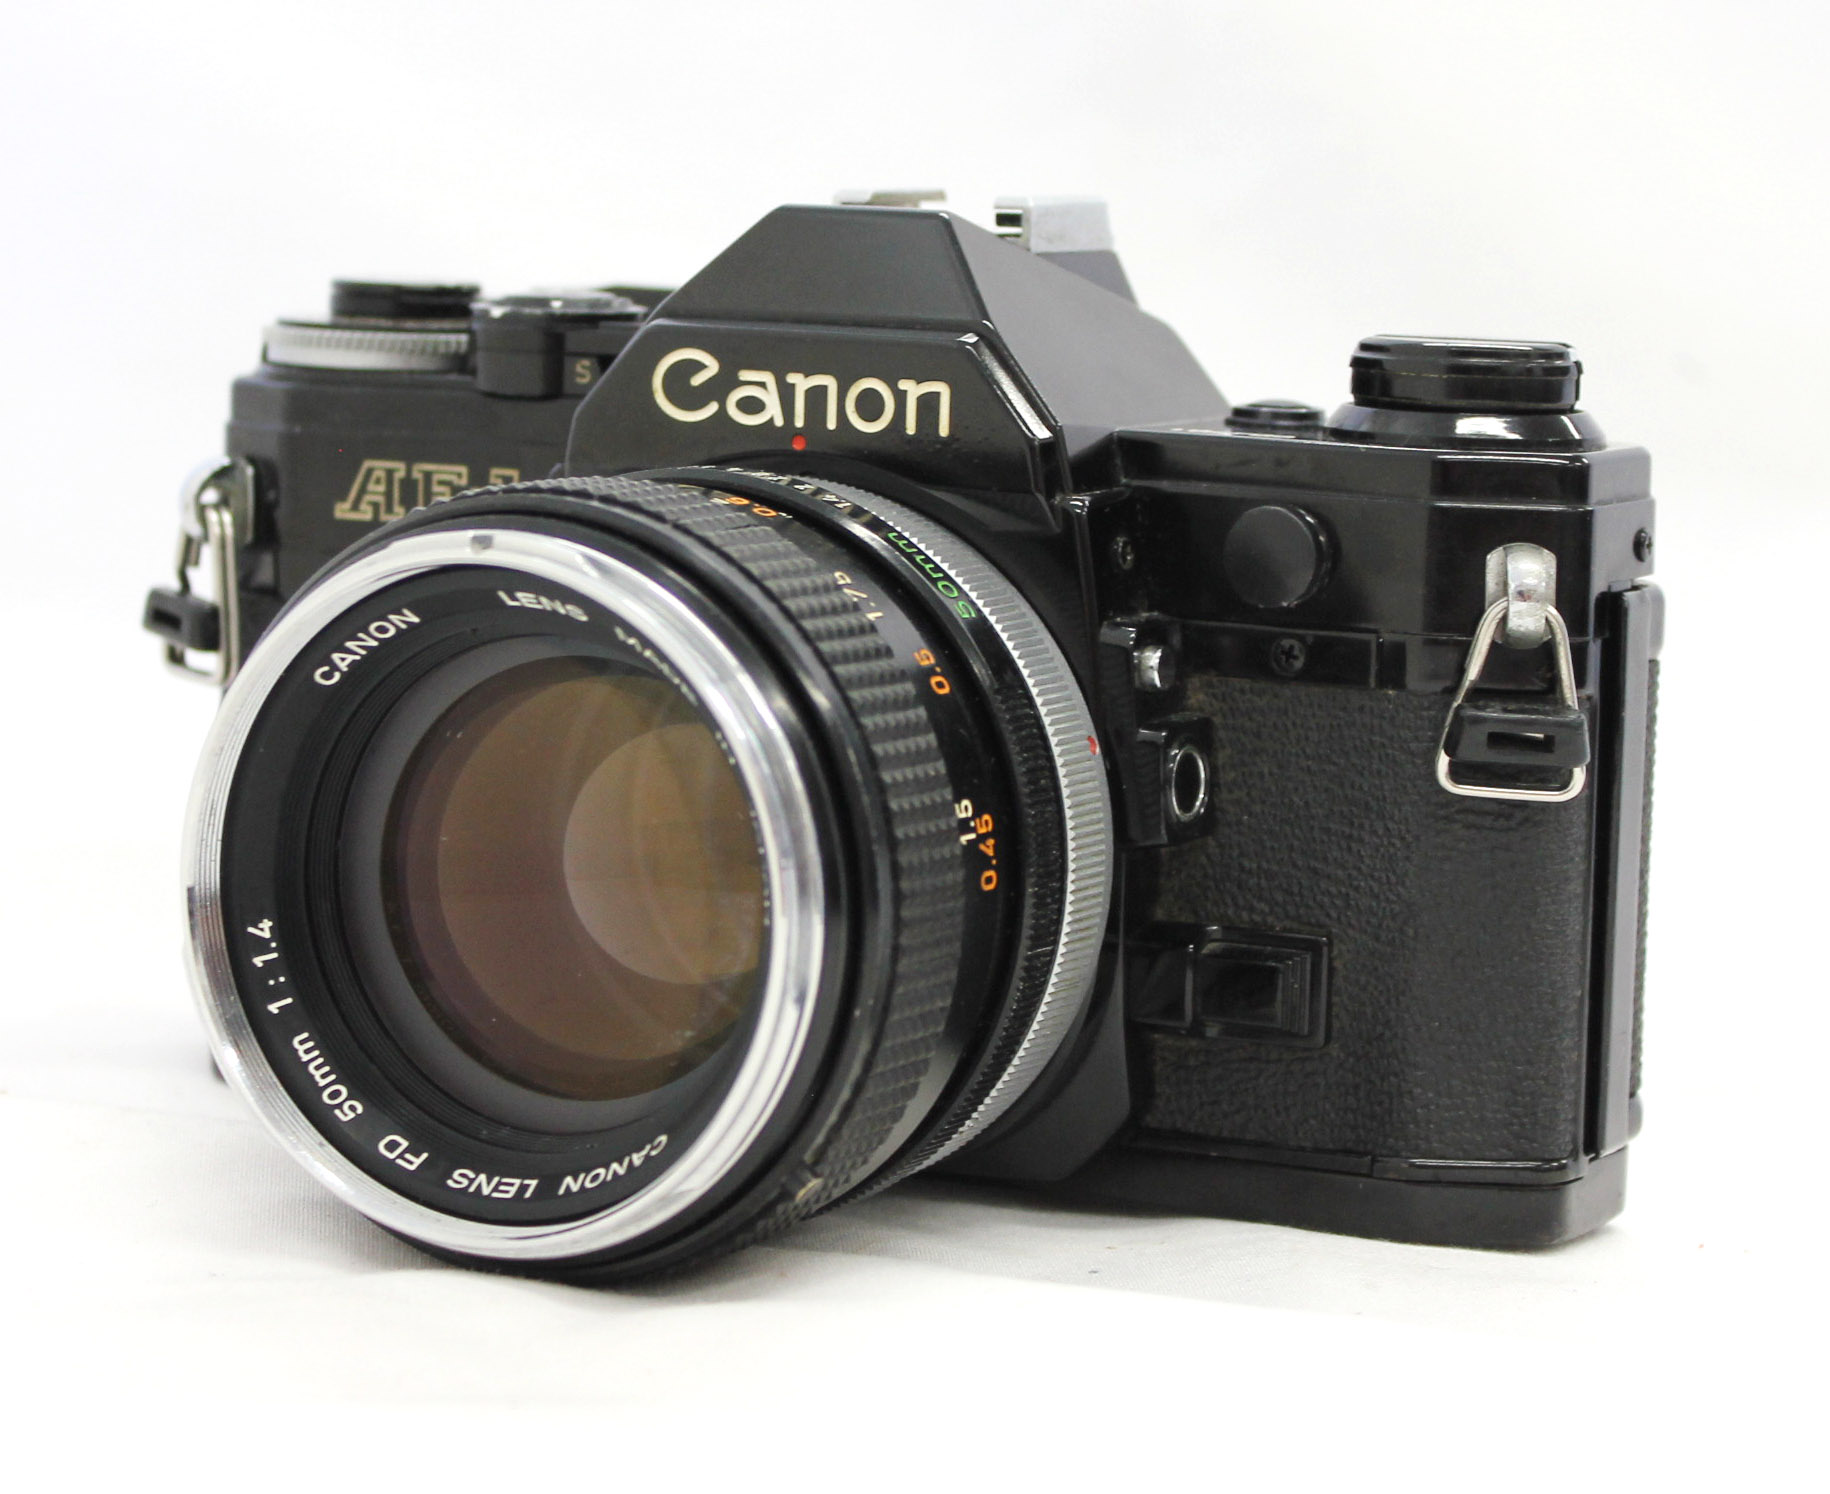 Japan Used Camera Shop | Canon AE-1 35mm SLR Film Camera with FD 50mm F/1.4 Lens from Japan